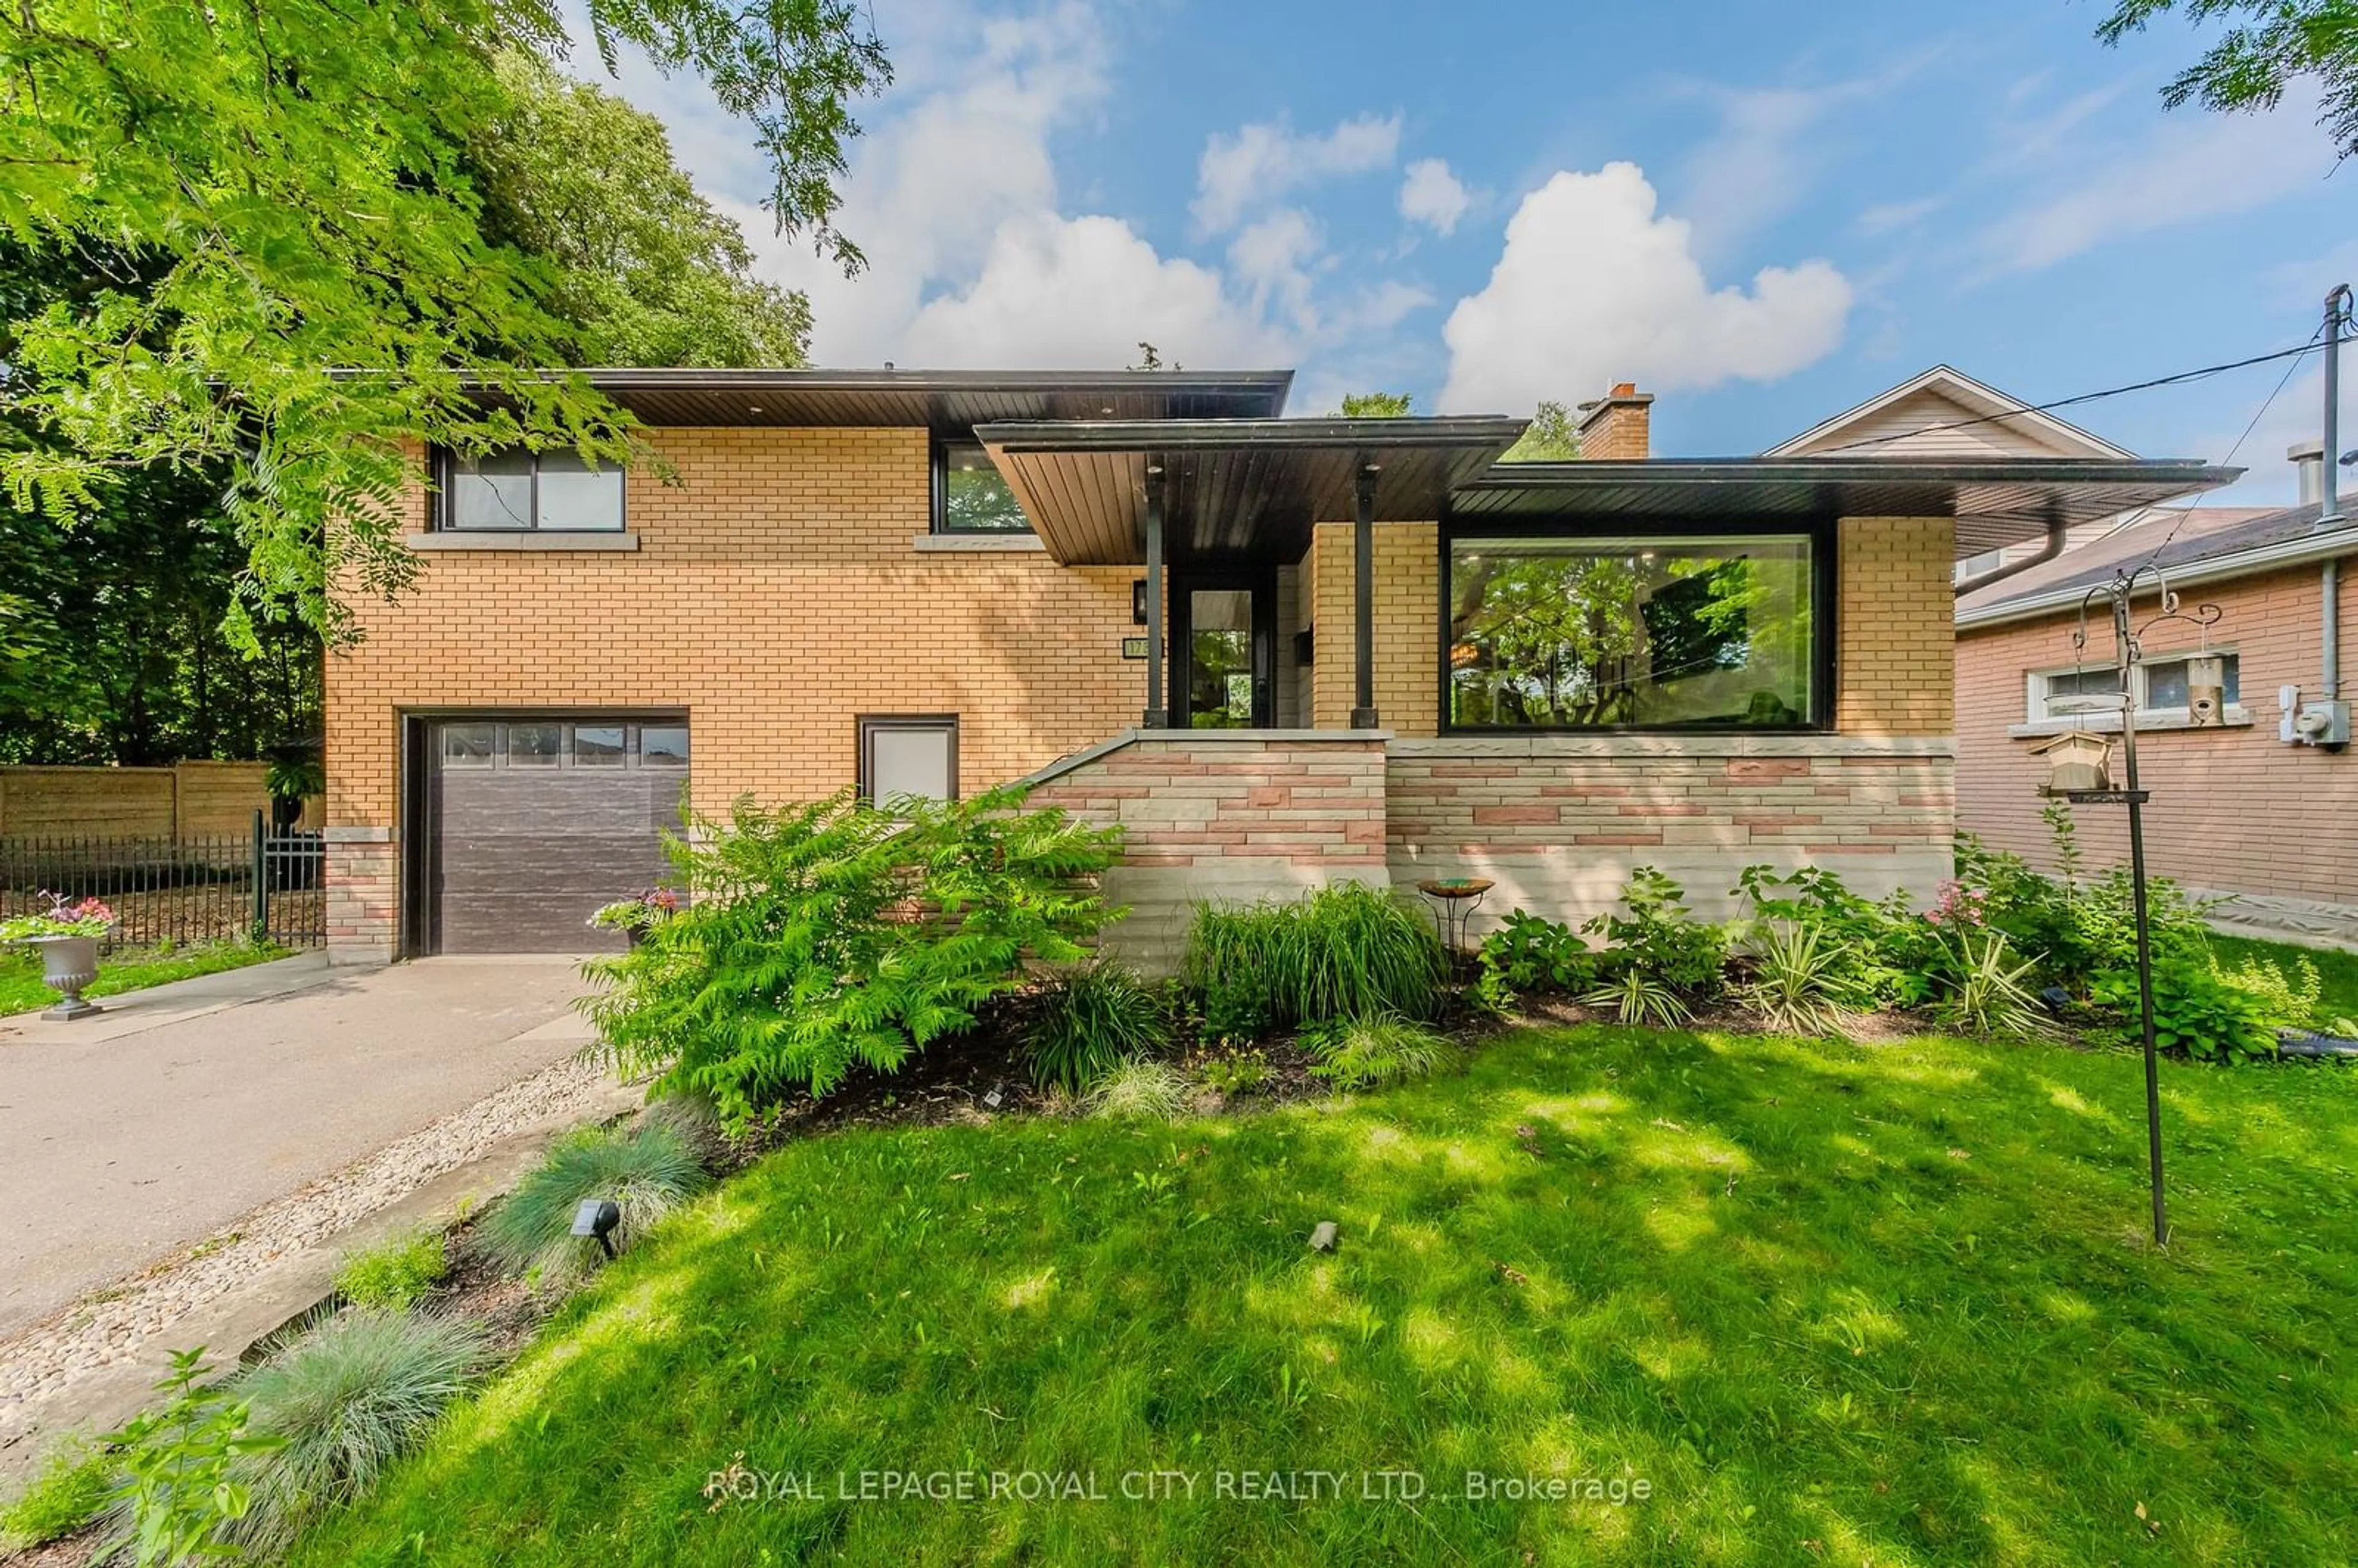 Home with brick exterior material for 1735 Queenston Rd, Cambridge Ontario N3H 3M3